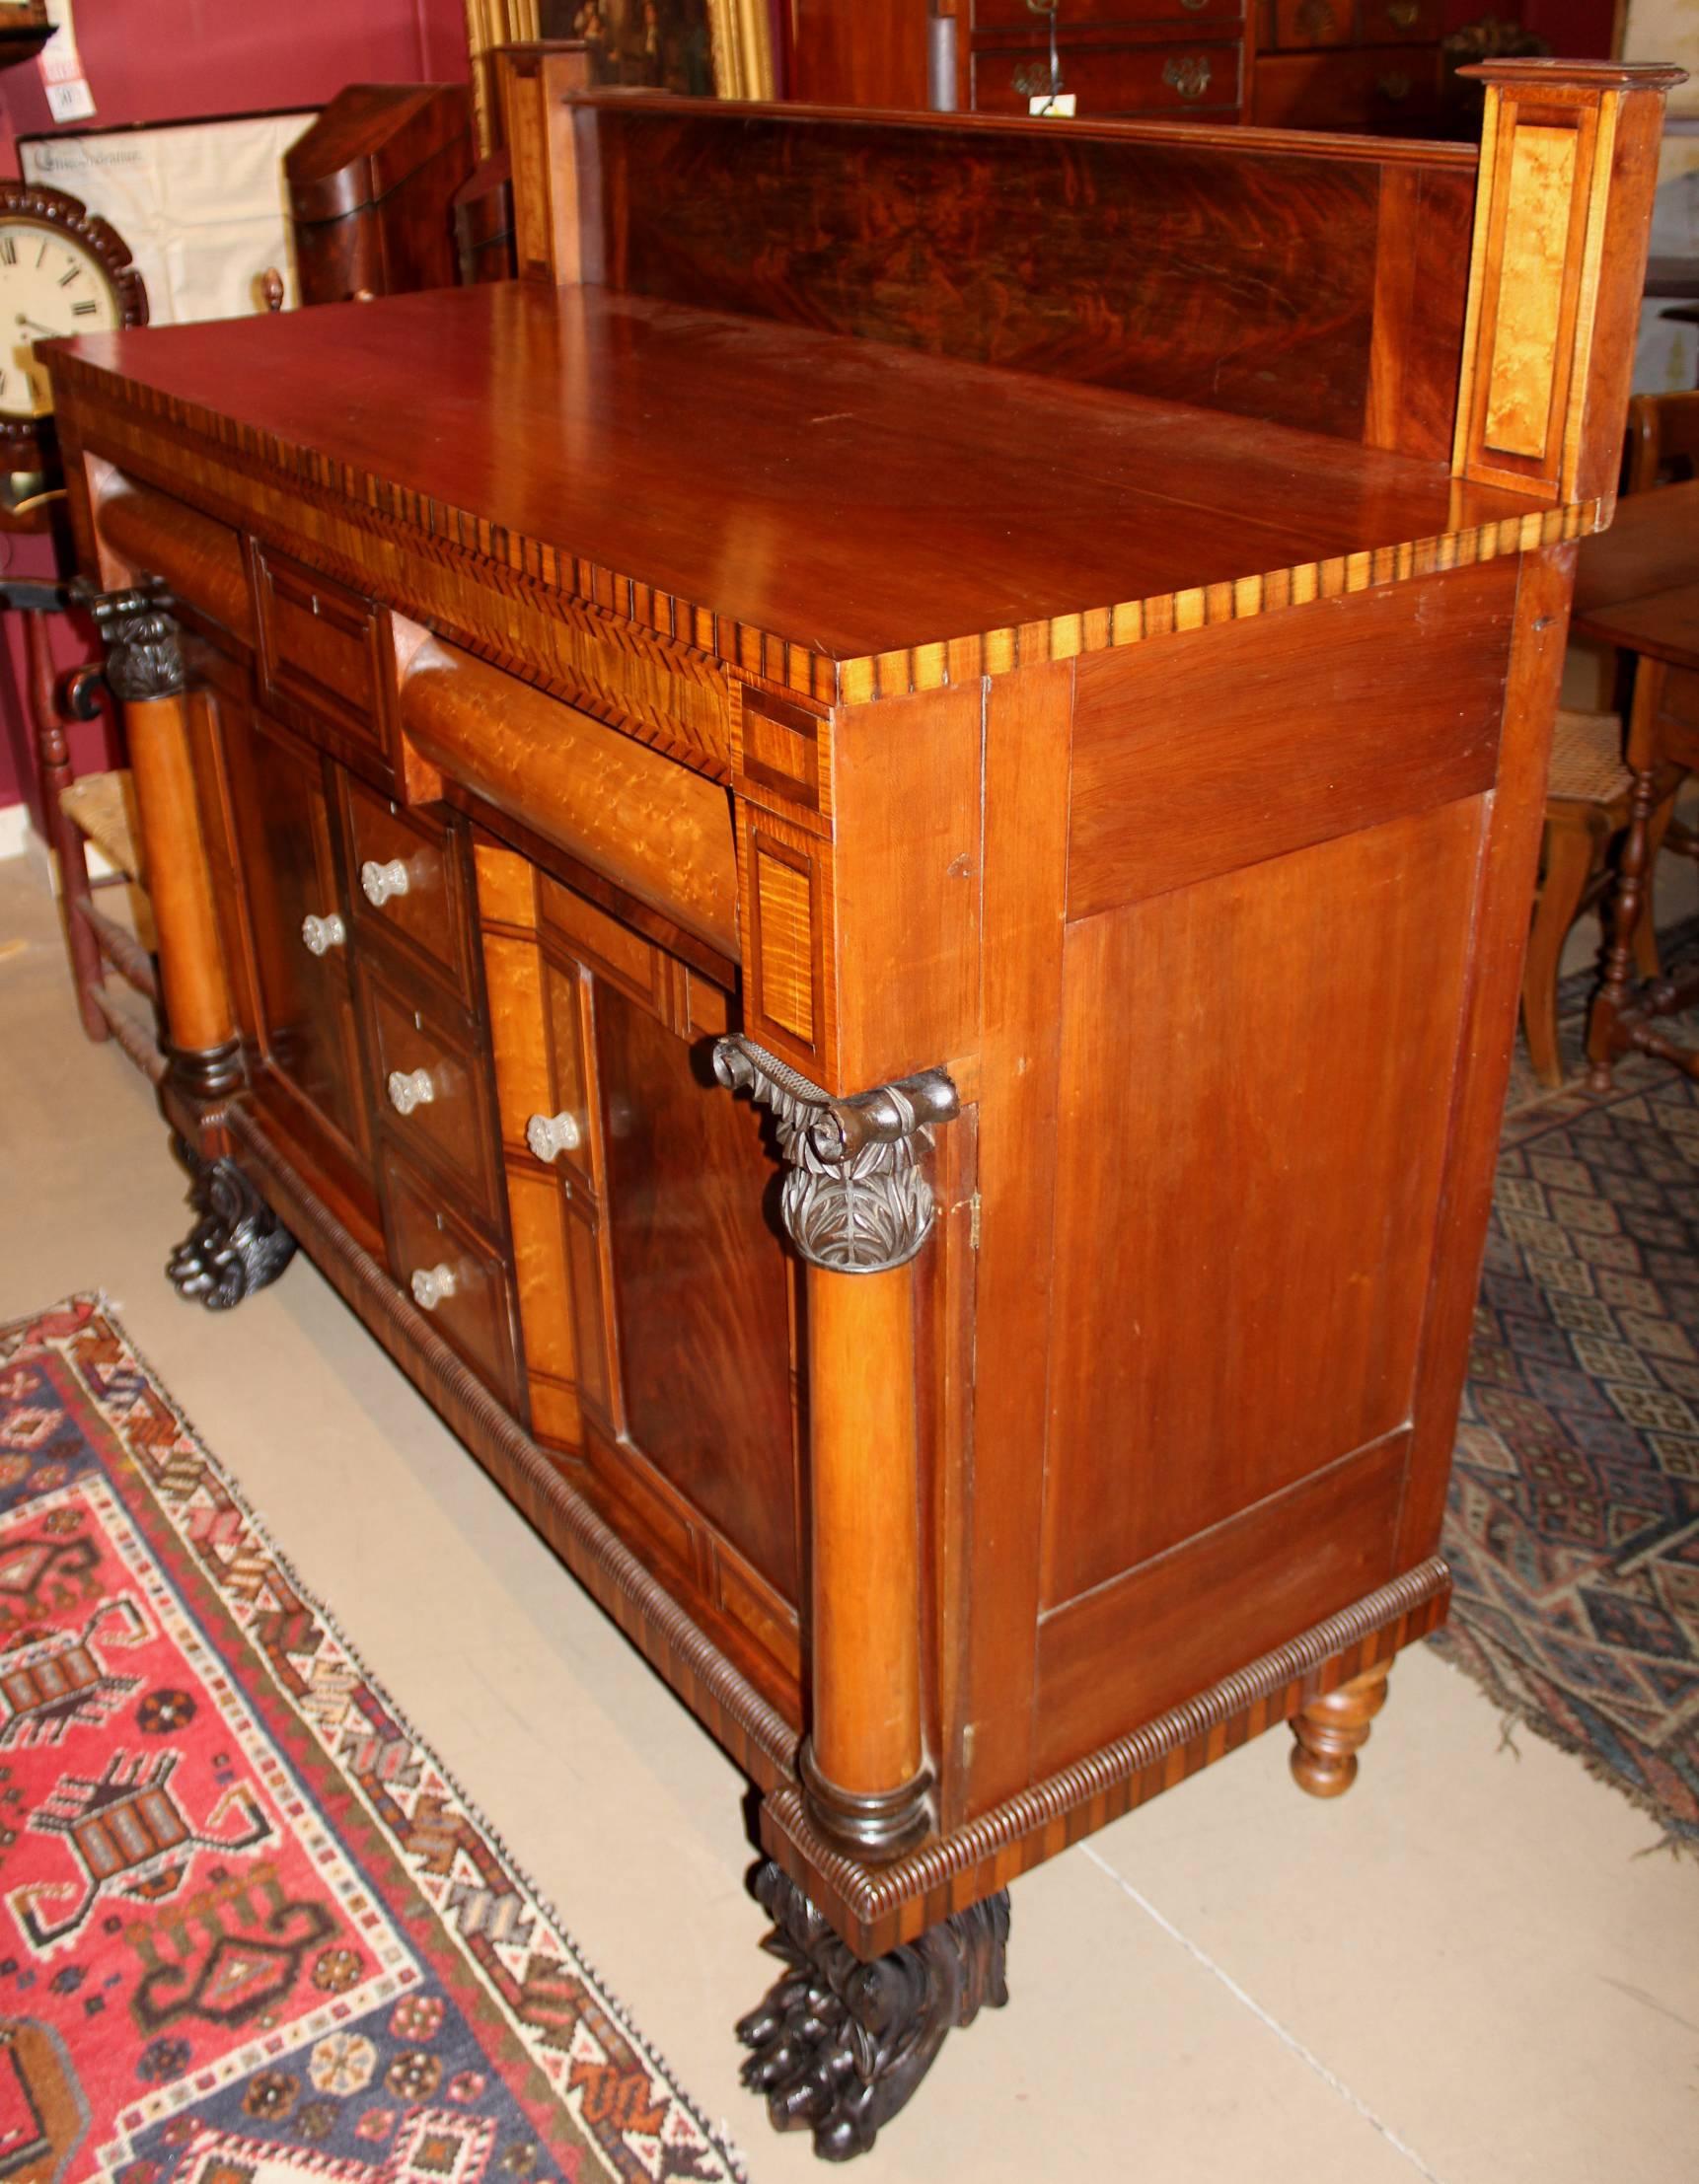 An exceptional American Empire mahogany server with superb checkered and banded inlays and veneers in satinwood, tiger maple, bird's-eye maple, and bookmatched mahogany, with four central banded bird's-eye veneered drawers flanking two fitted